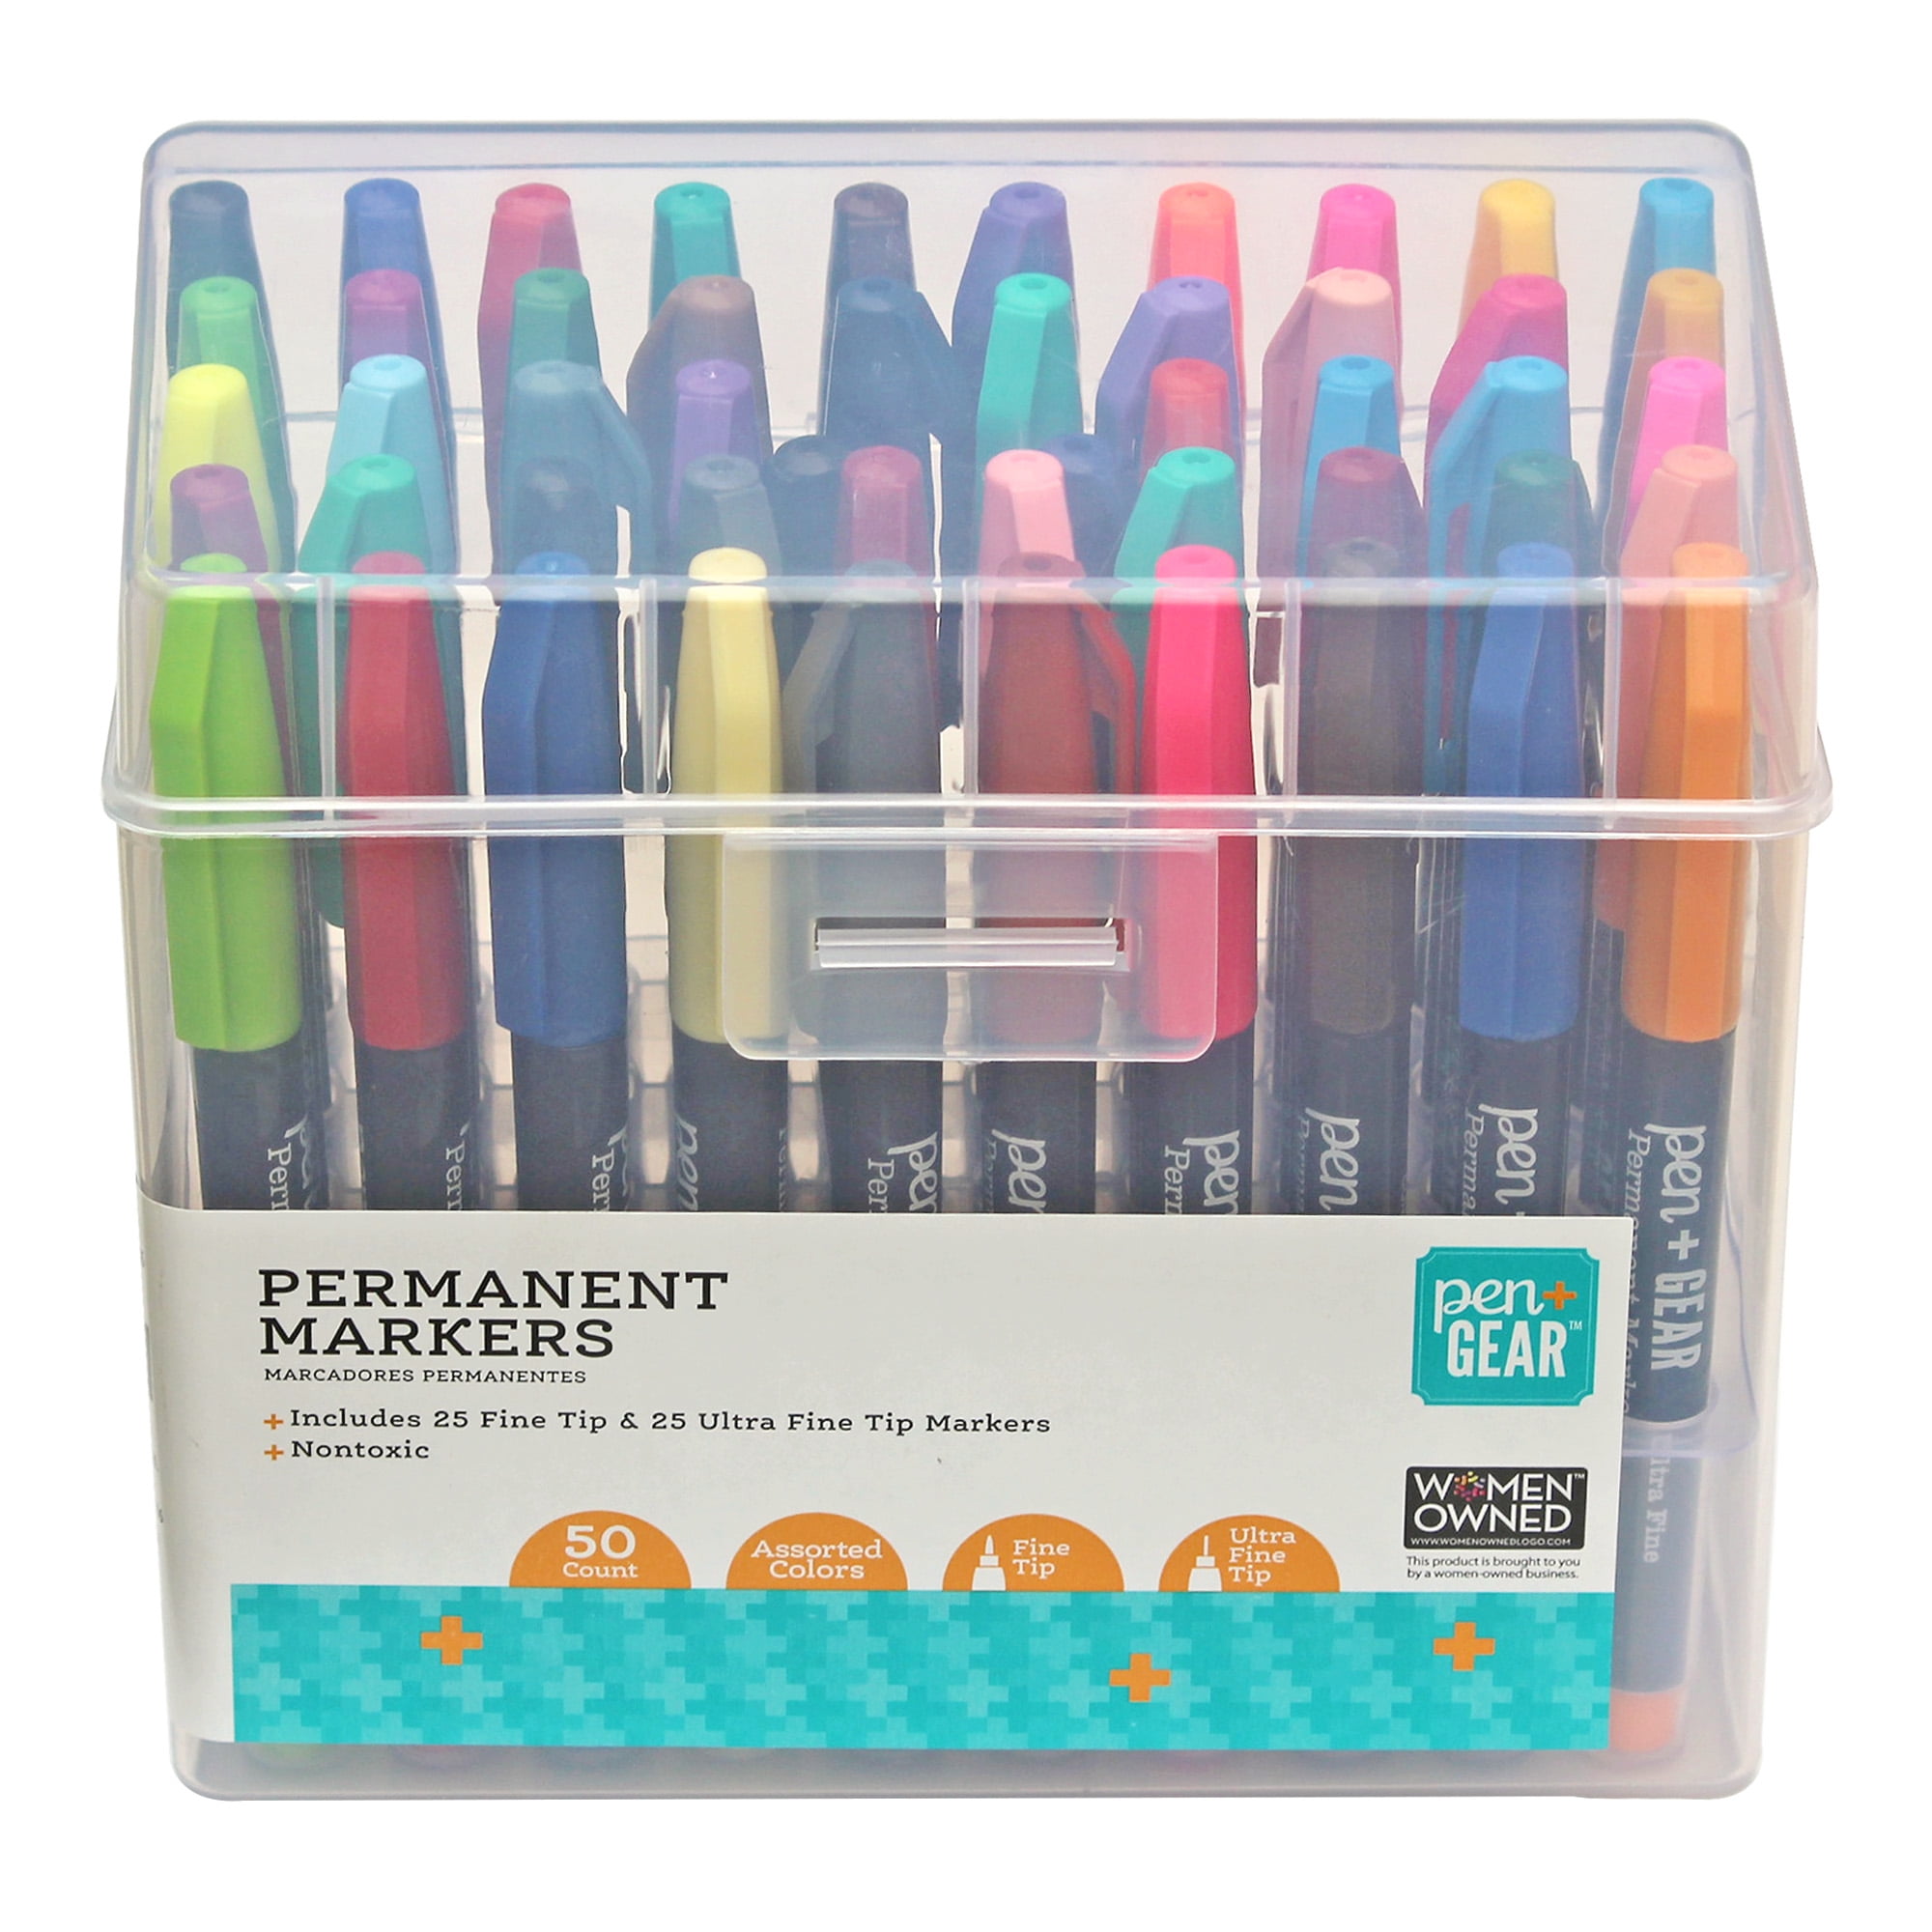 Pen+gear Permanent Markers, Fine+Ultra Fine, Assorted Colors, 50 Count